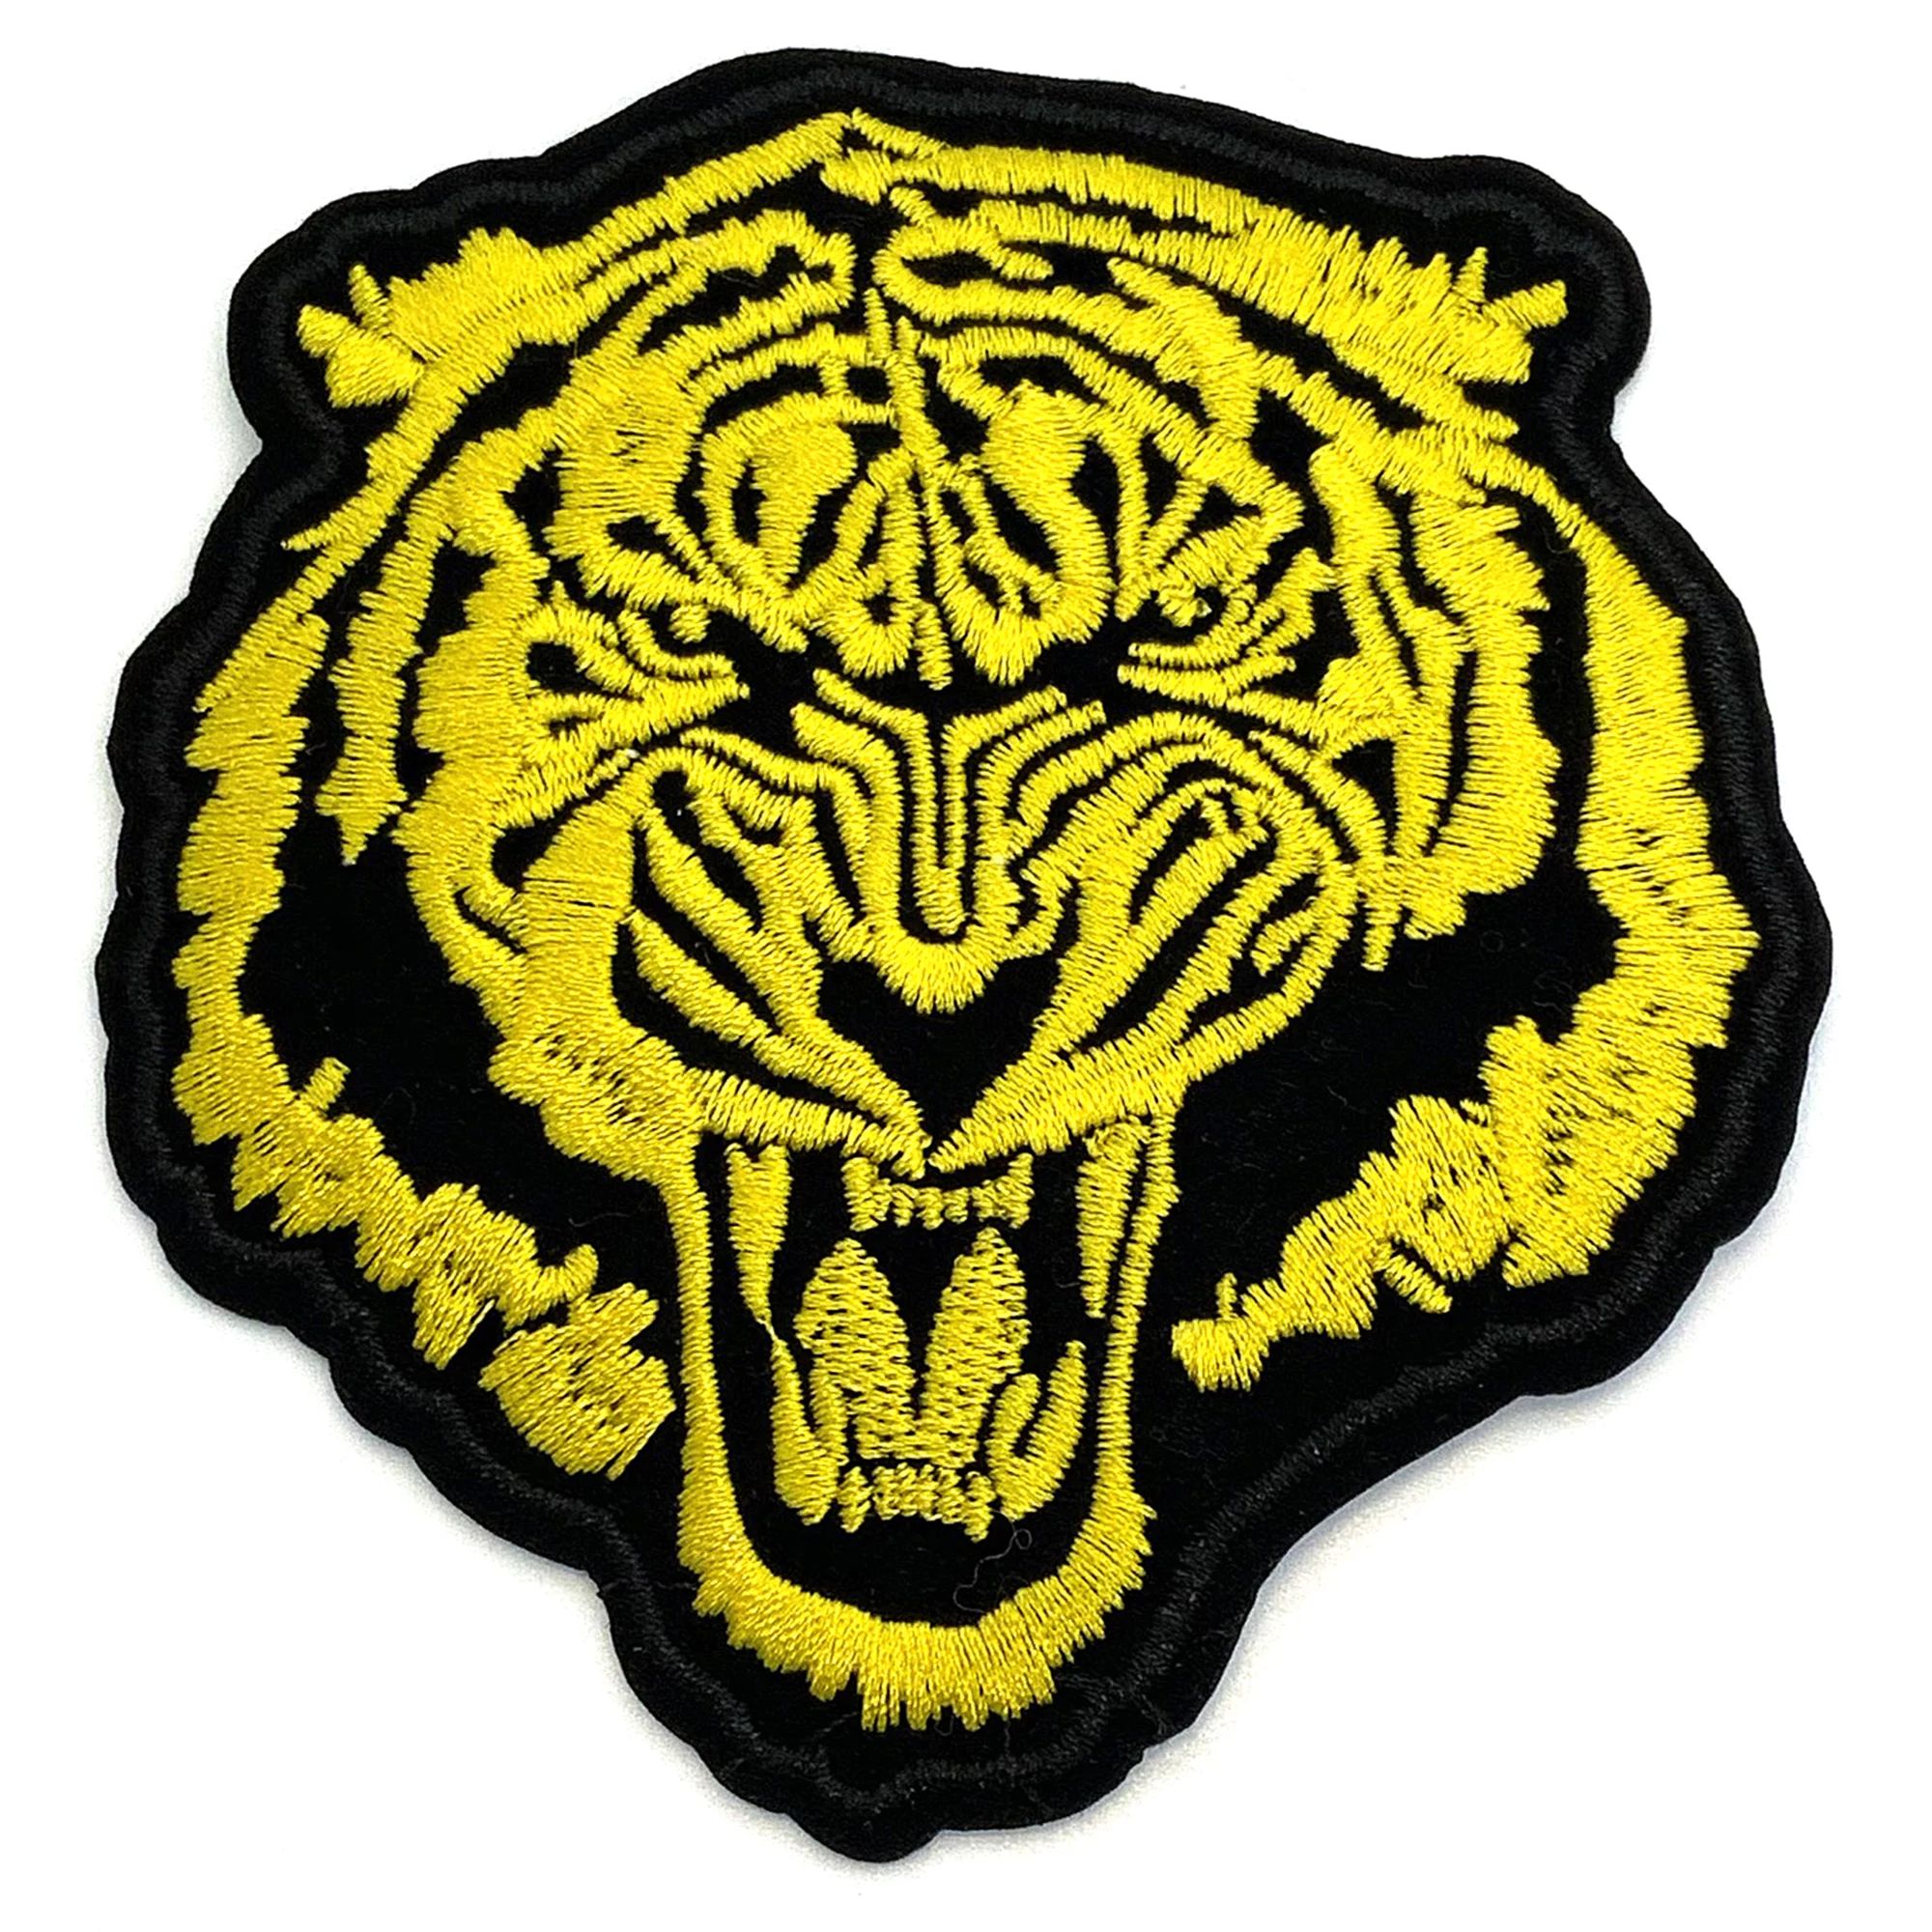 GWEN STUDIOS Black and Yellow Fighting Tiger Embroidered Iron-On Patch Applique | Walmart (US)